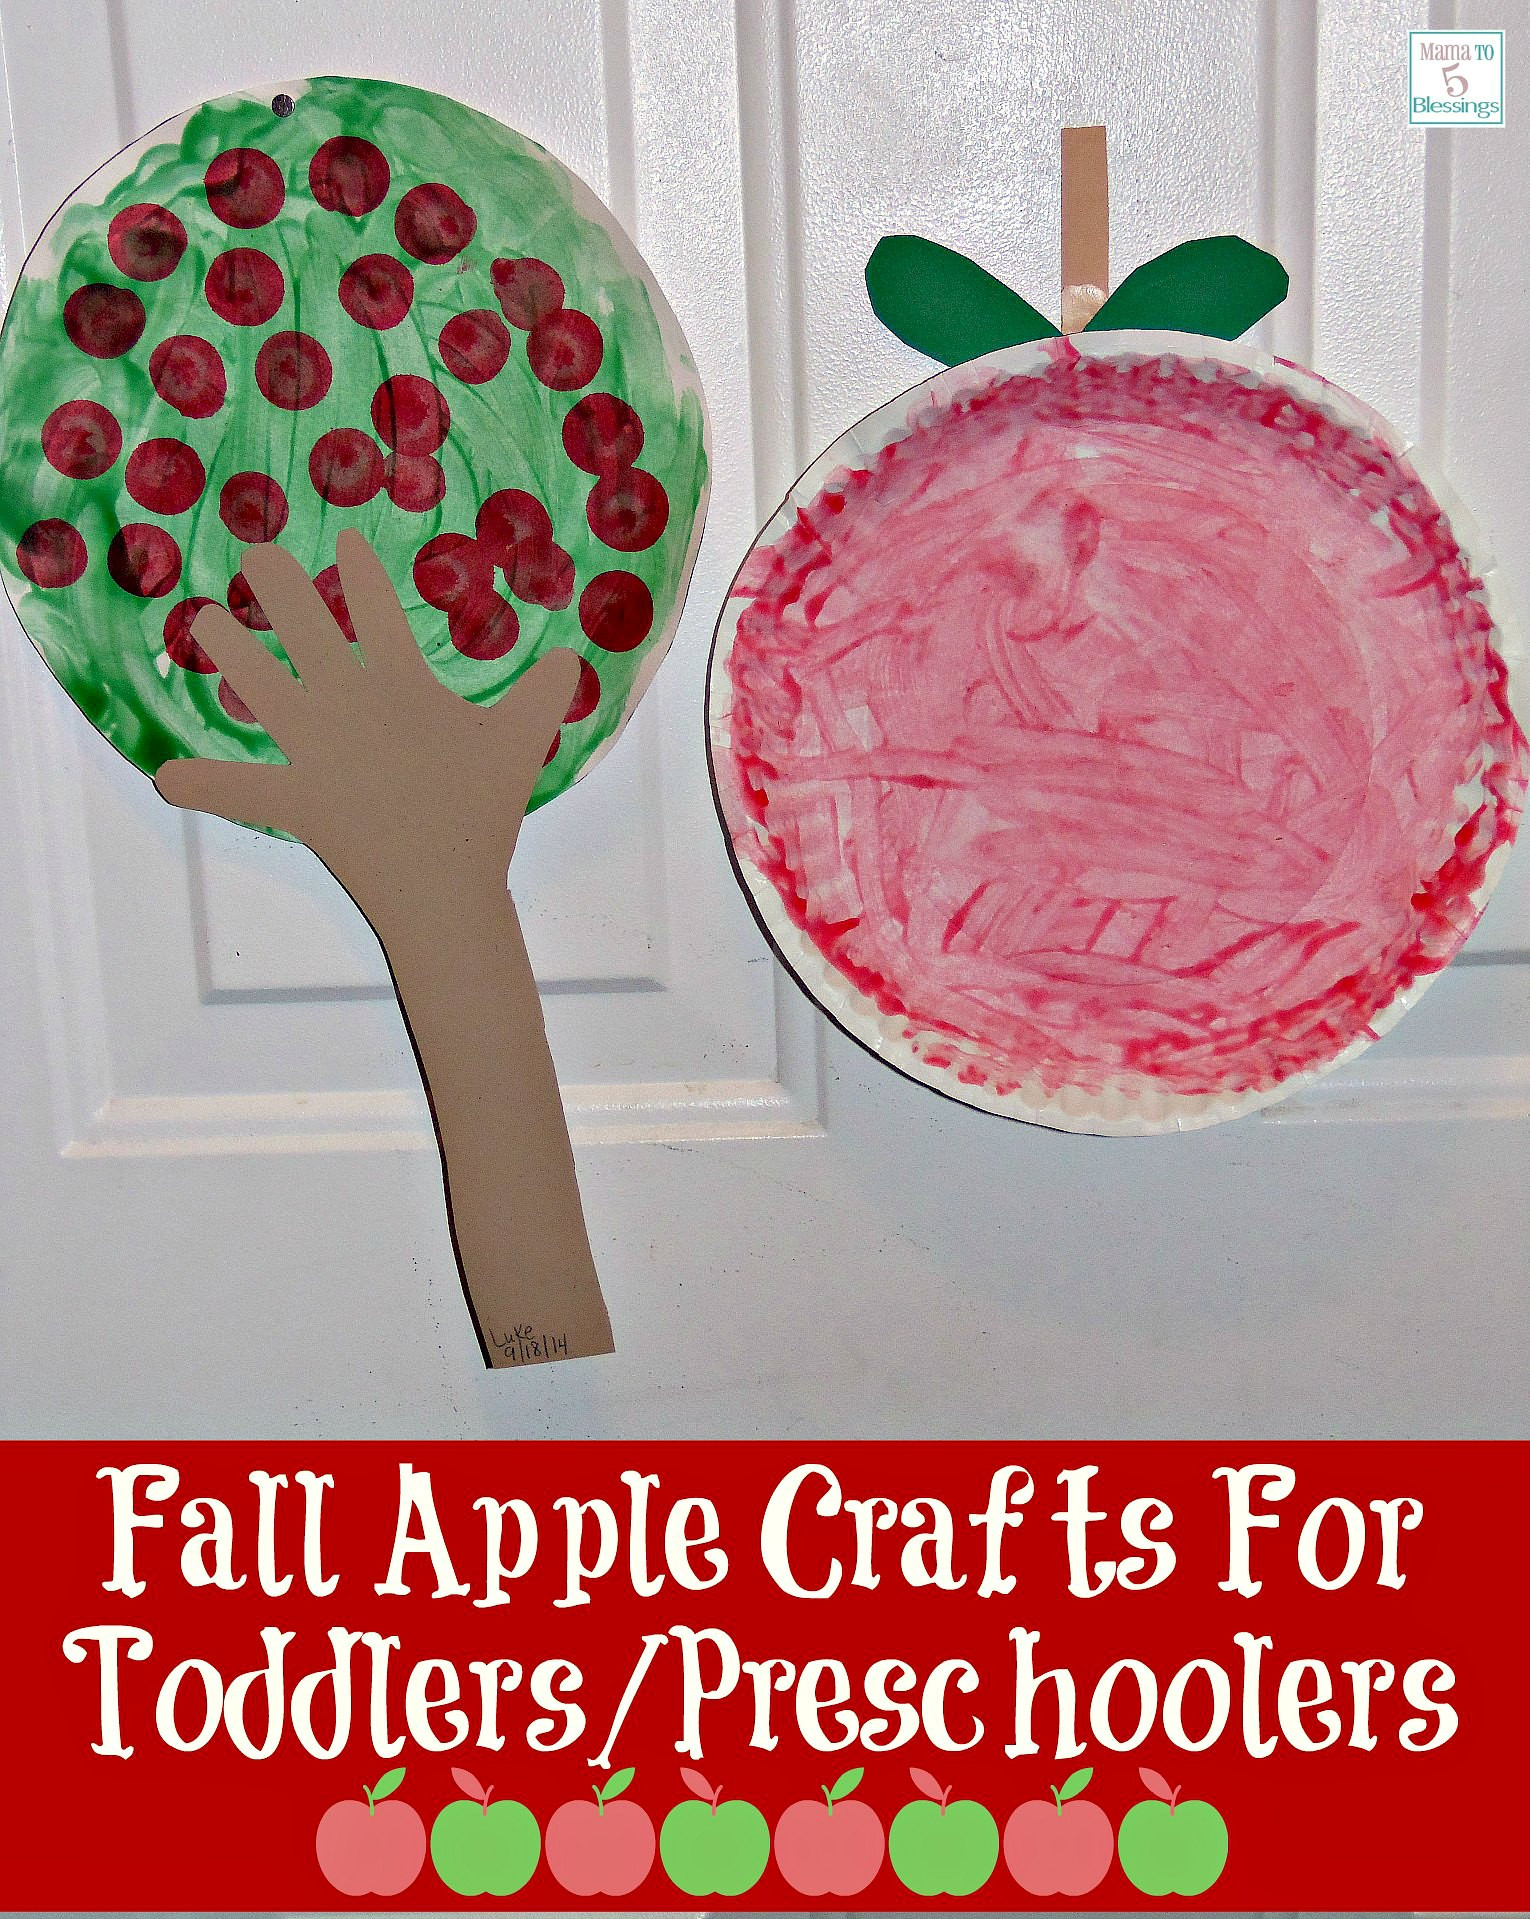 Craft Projects For Preschoolers
 Fall Apple Crafts For Toddlers Preschoolers